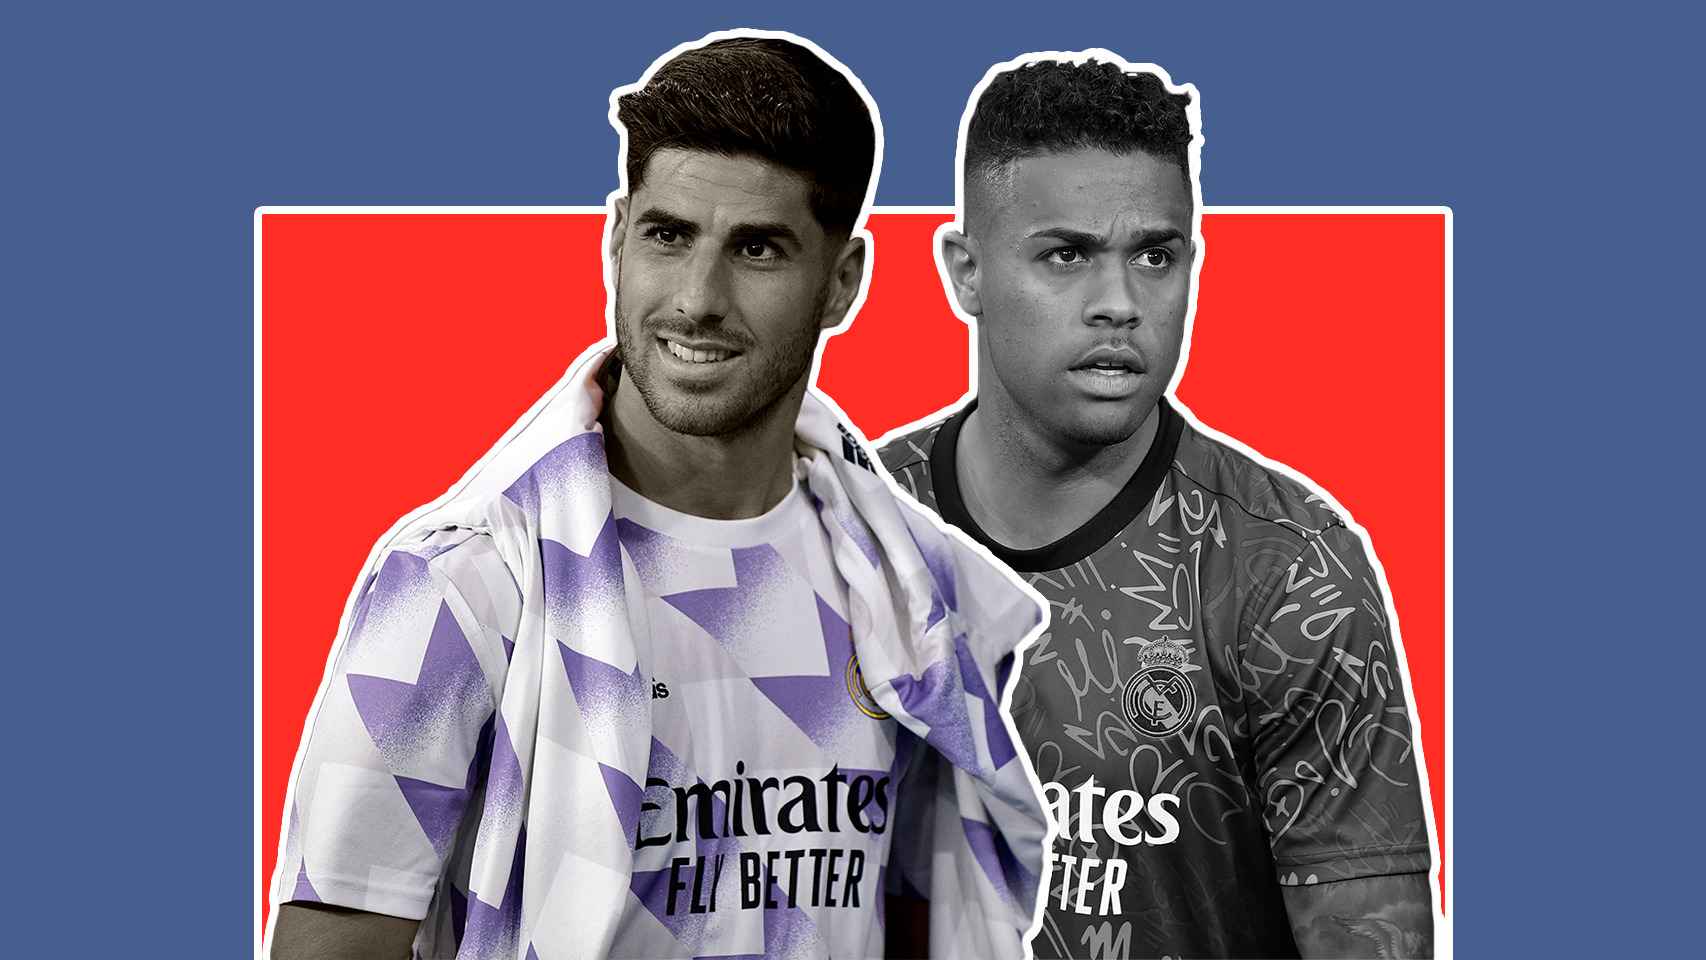 The scare of Spaniards at Real Madrid continues: after Asensio and Mariano another star leaves
	
